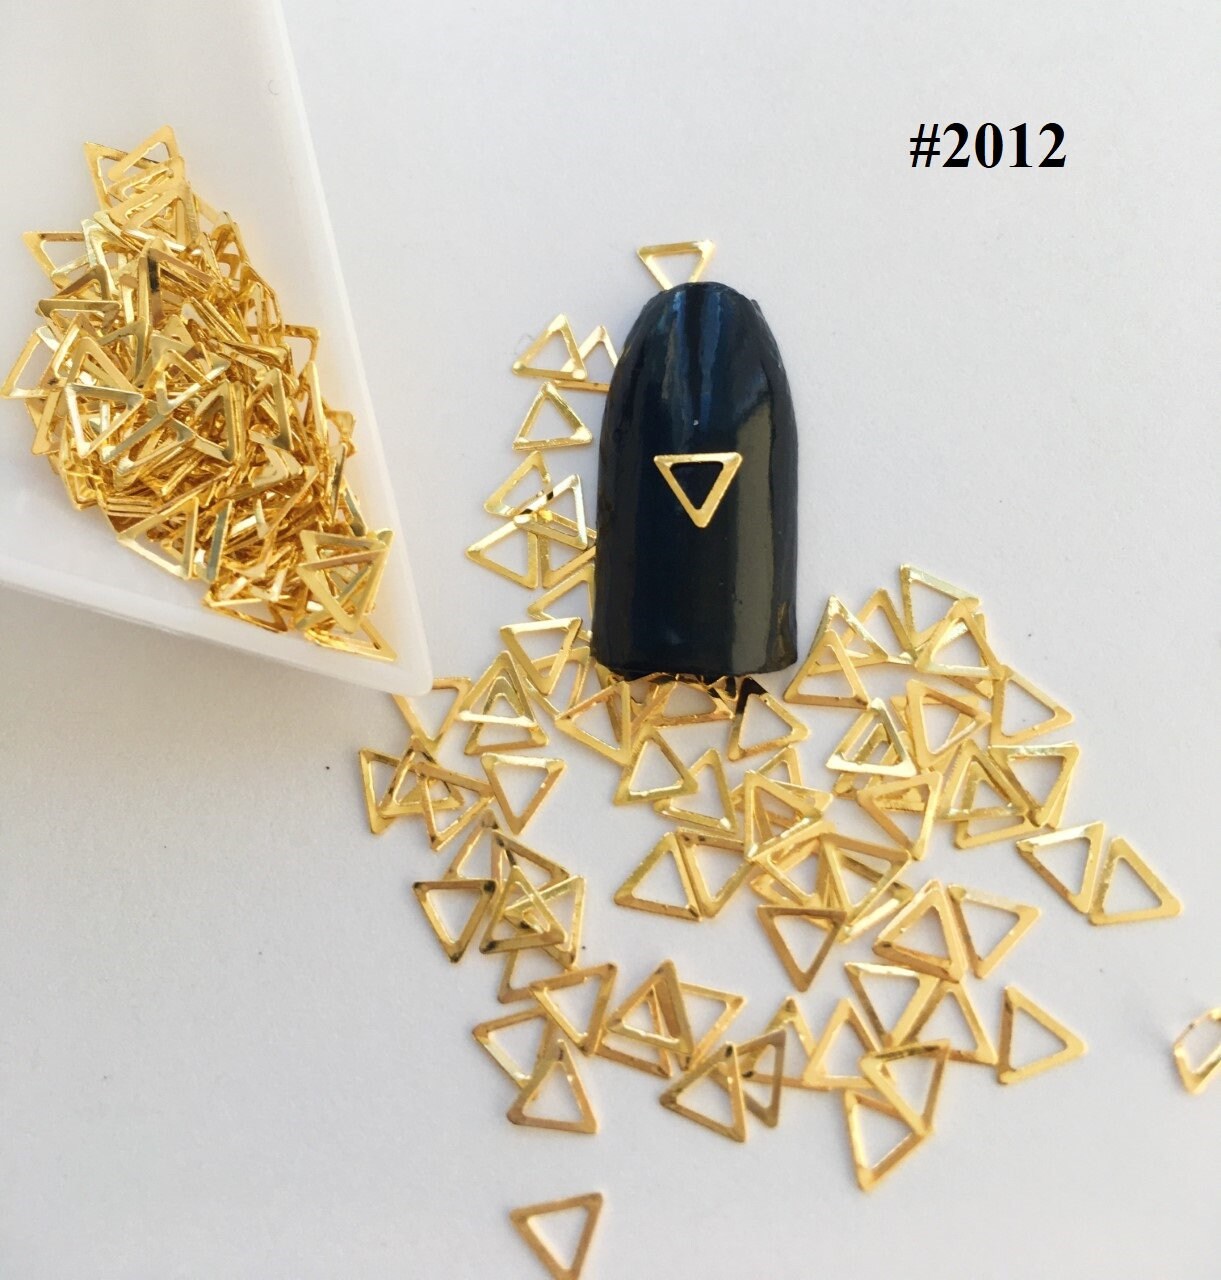 Nail Art Charm Resin Supplies Cute Kawaii Nail Triangles Tiny Gold Triangles Cabochons Nail Decals 10/20/50 Pieces #2012 Resin add-on